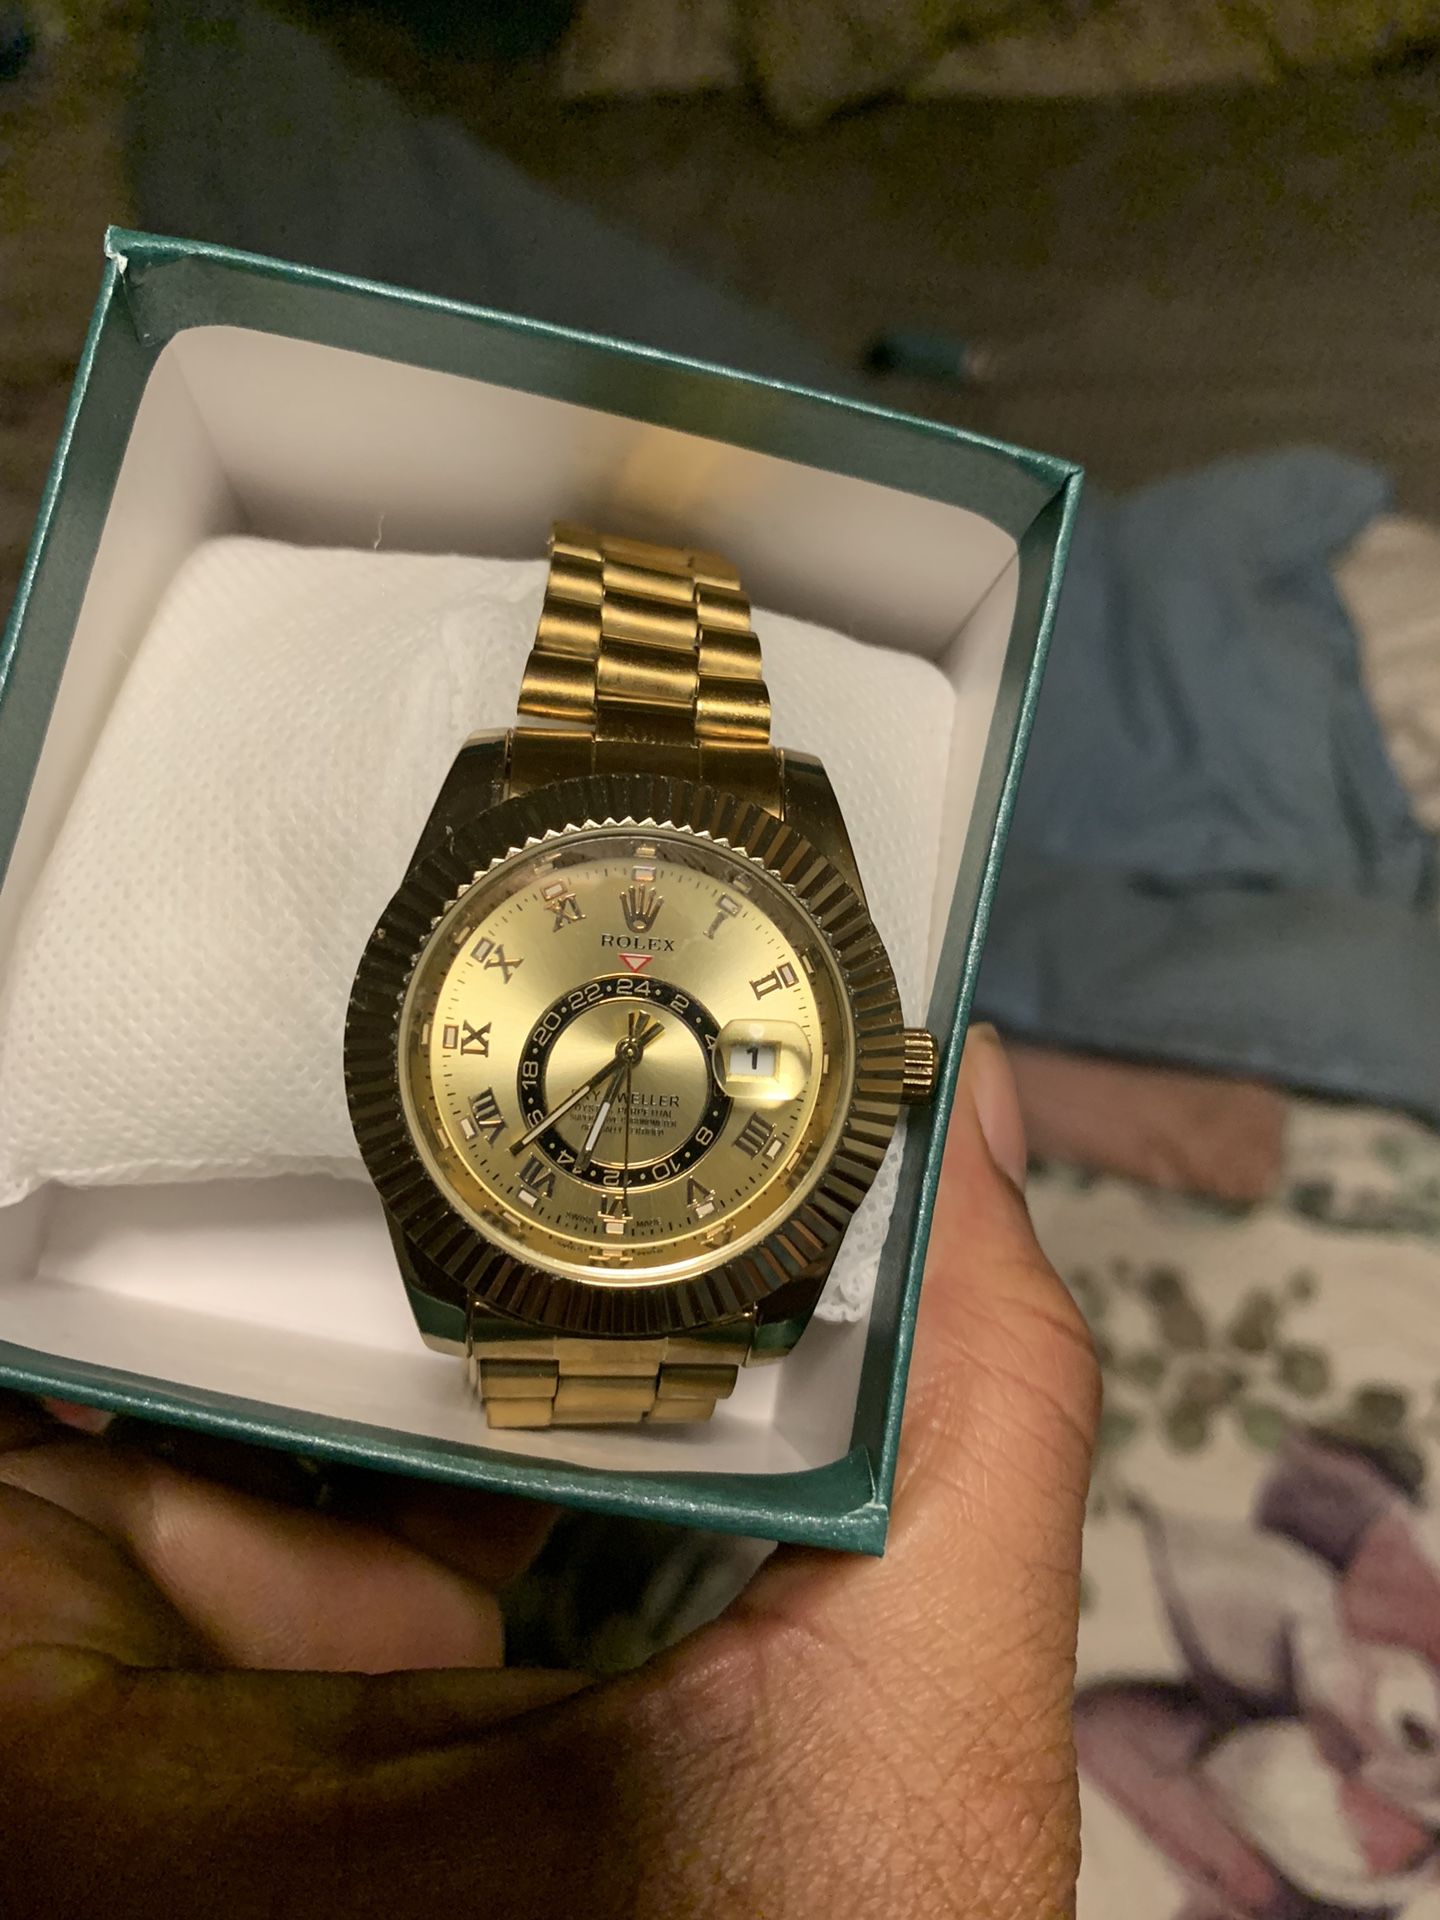 Mental Watch Great Condition 